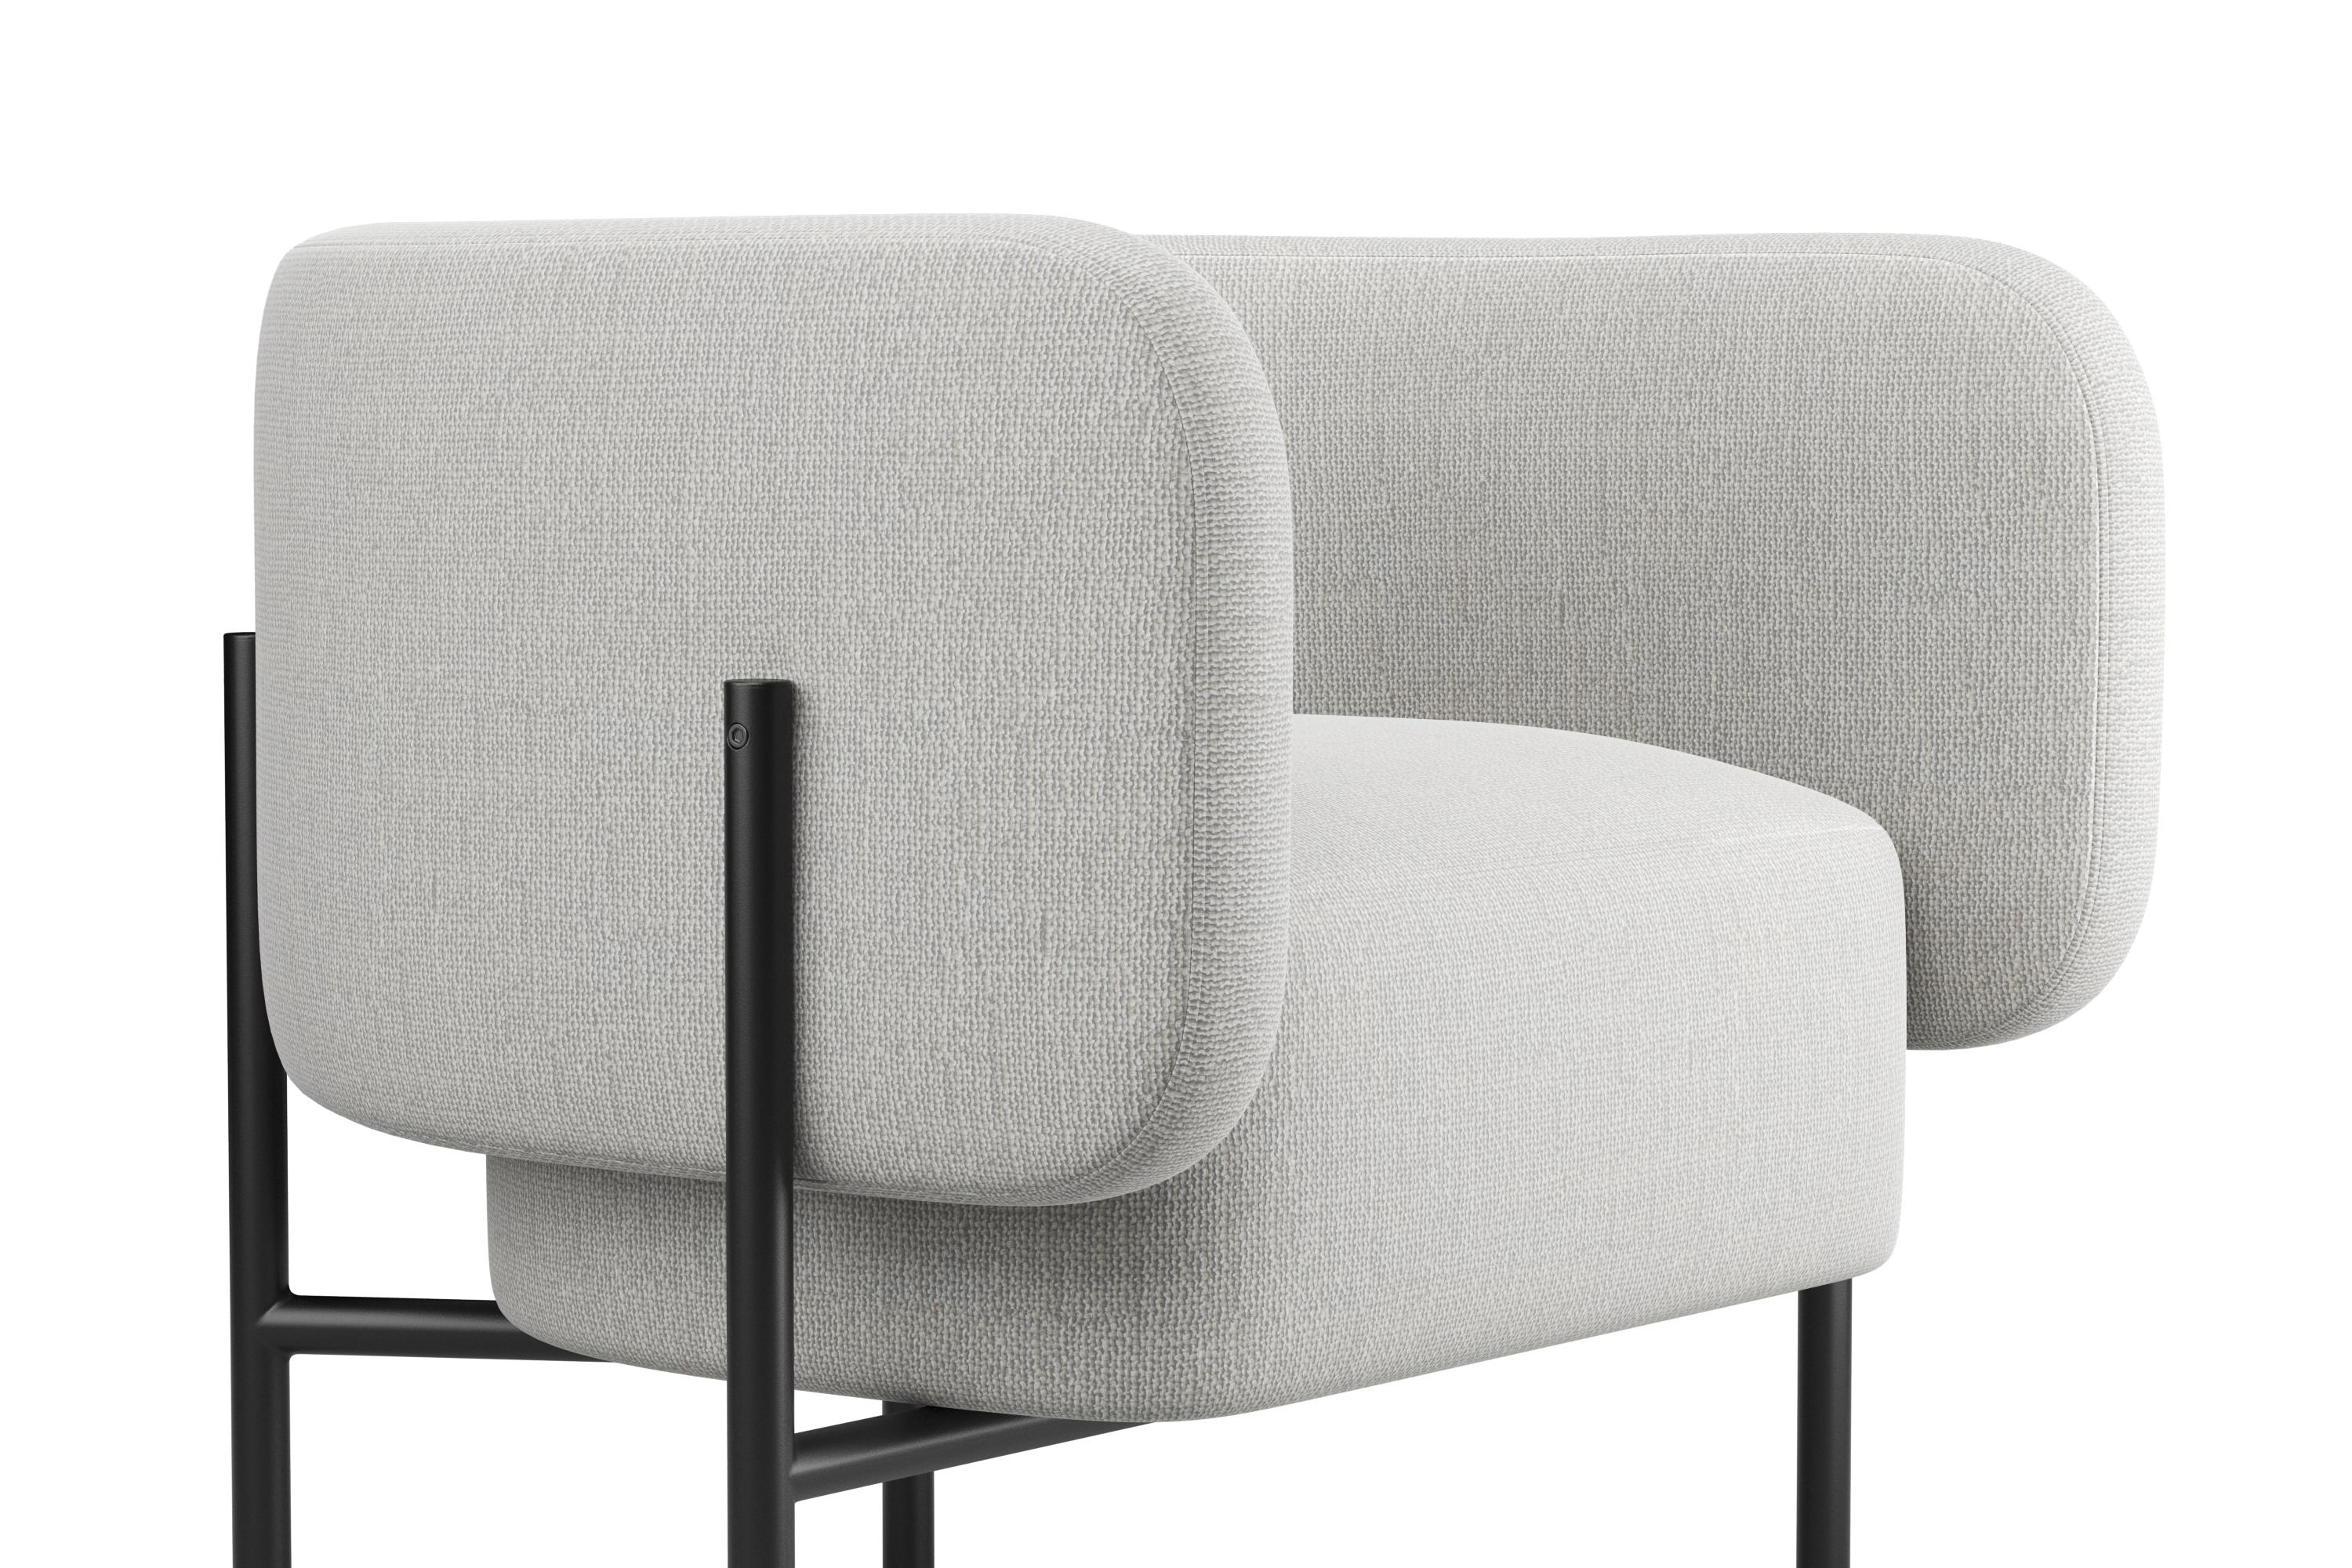 The Abrazo Armchair, translating to 